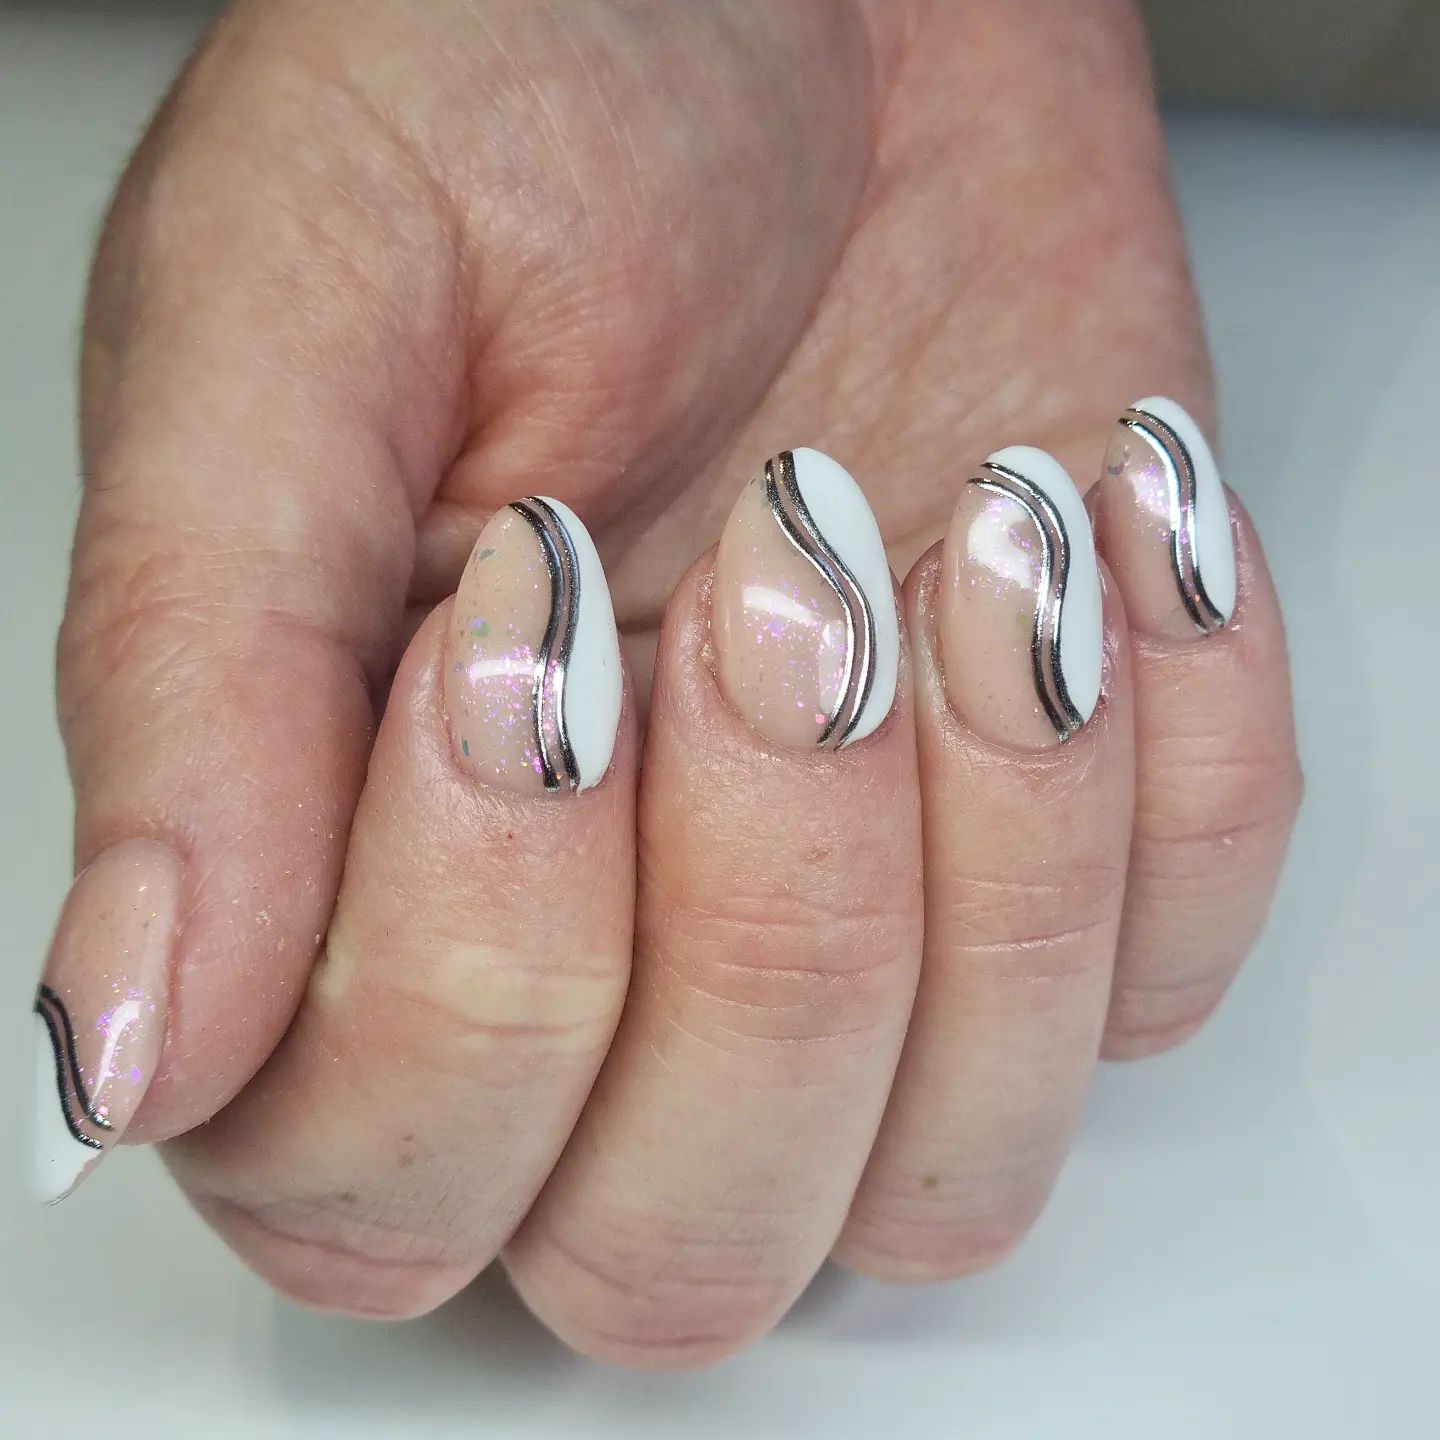 Thin swirl nail art is nice but sometimes thick ones are also classy. If you want to have swirls on each finger, these big swirls are preferable with a metallic look.